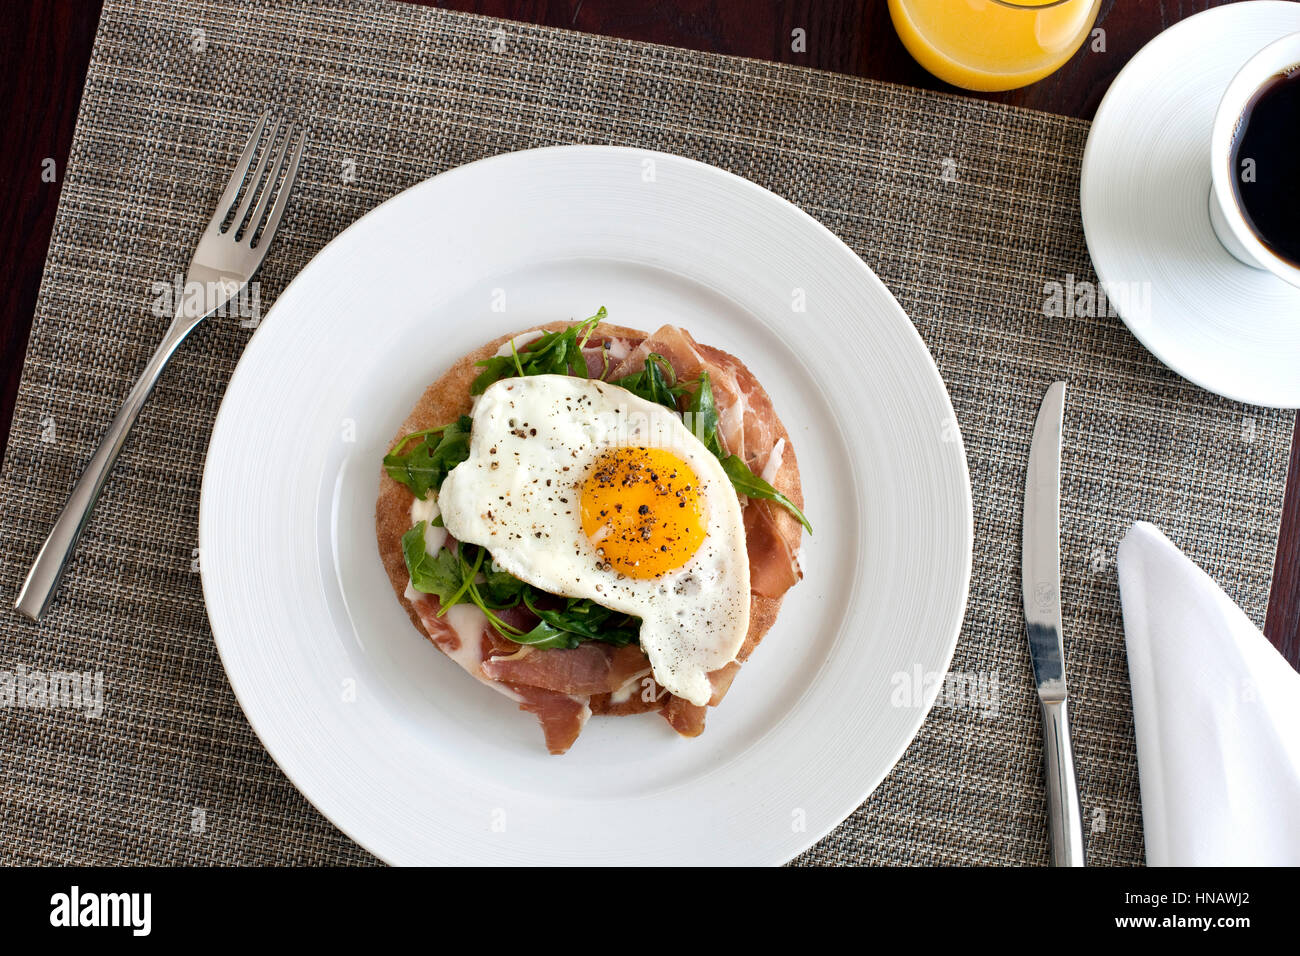 Open faced fried egg sandwich on white plate, Kennebunkport, ME. Stock Photo